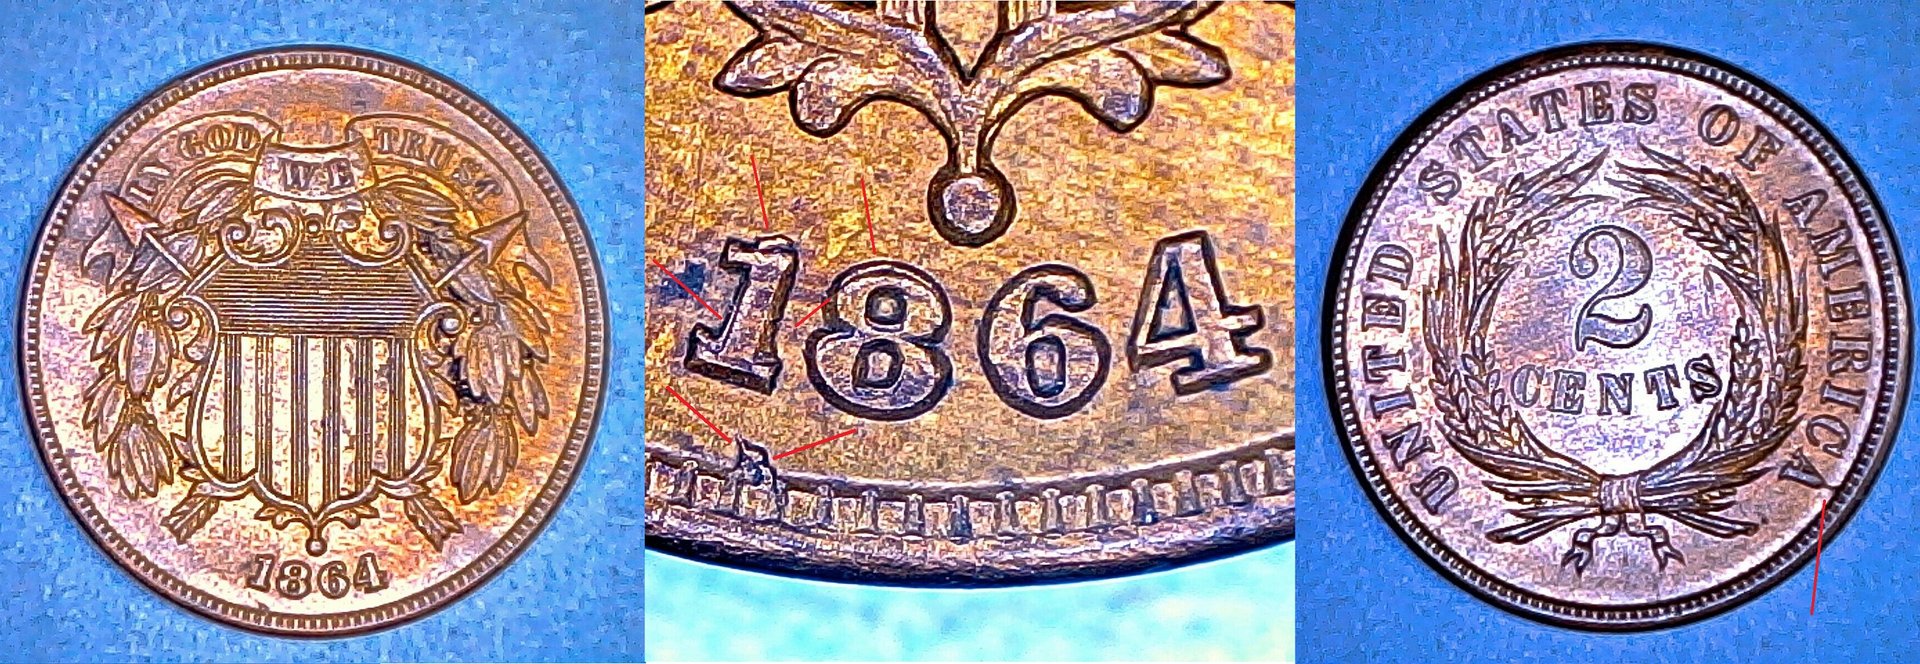 1864 Two Cent Piece Lg Motto Au Mint Error Repunched Date Cracked Die Cuds  Rorate 170'.jpg